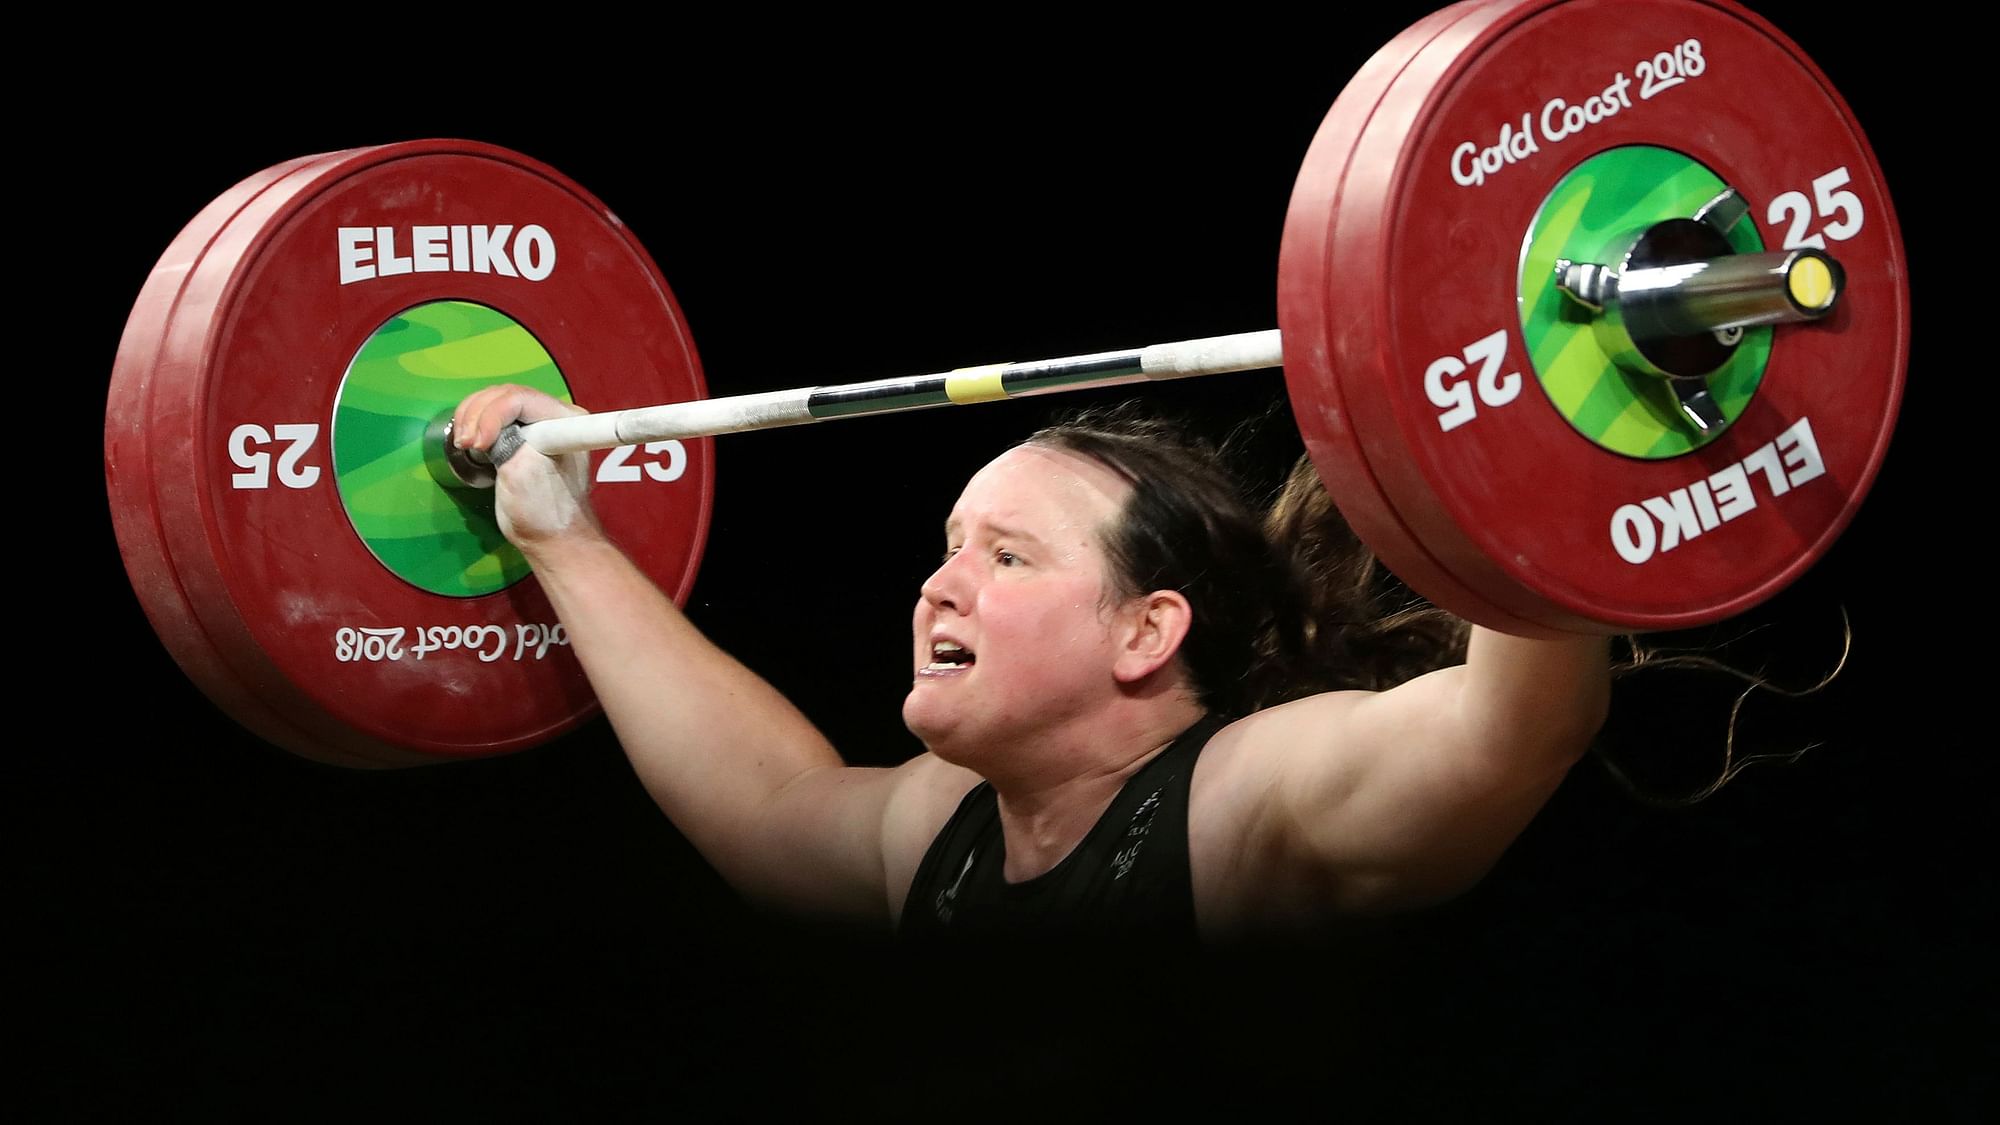 New Zealand’s Laurel Hubbard lifts in the snatch of the women’s +90kg weightlifting final the 2018 Commonwealth Games in Australia.